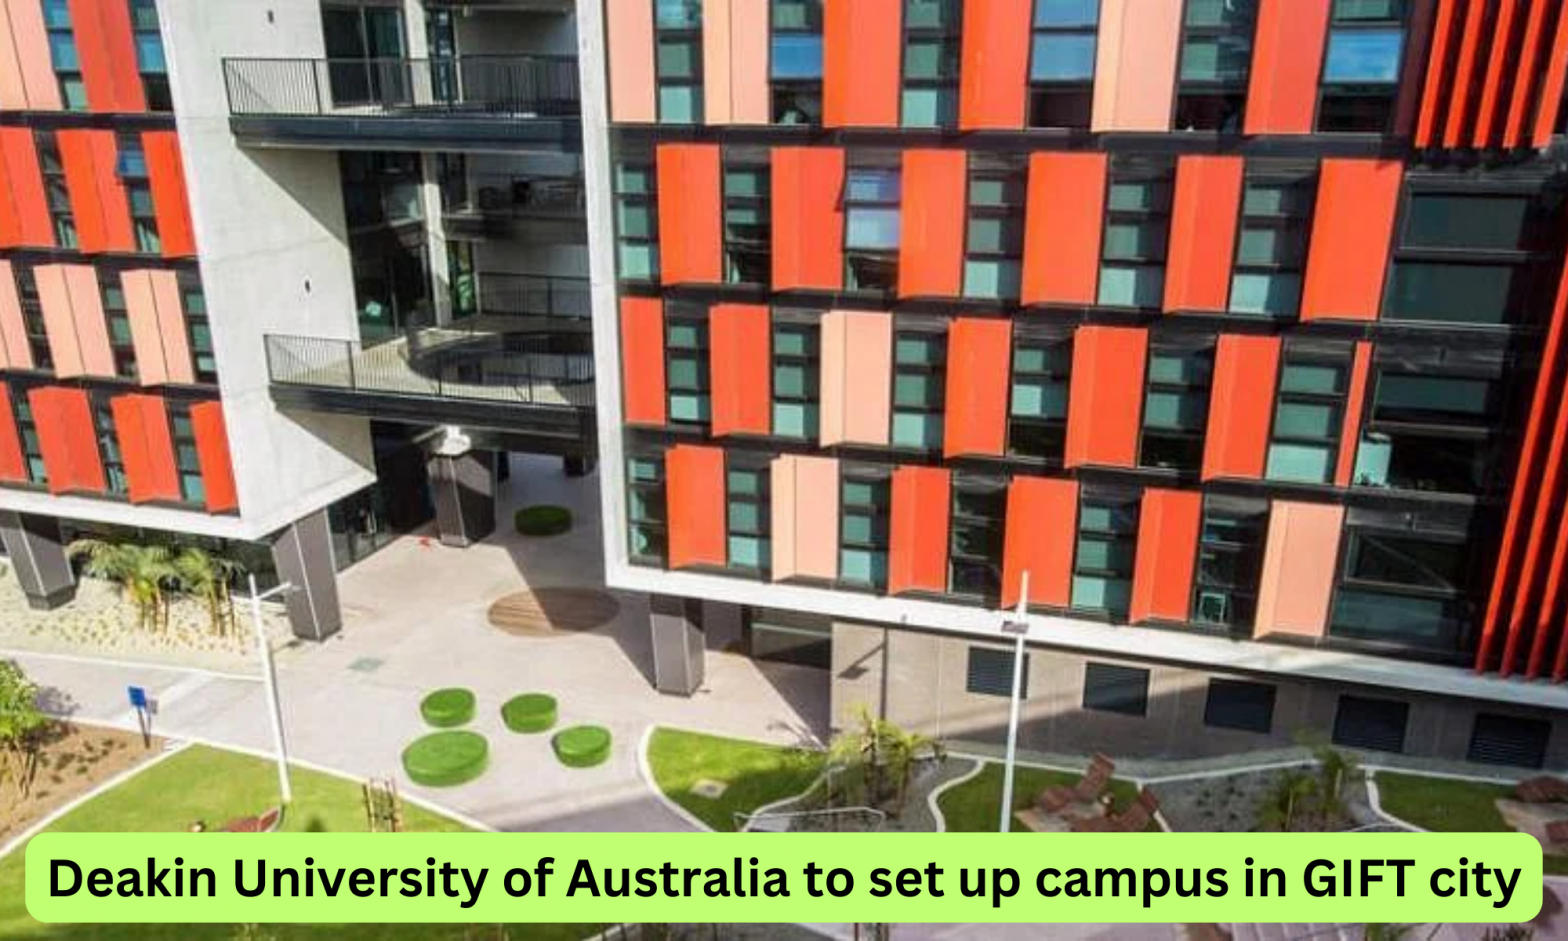 Deakin University of Australia to set up campus in GIFT city